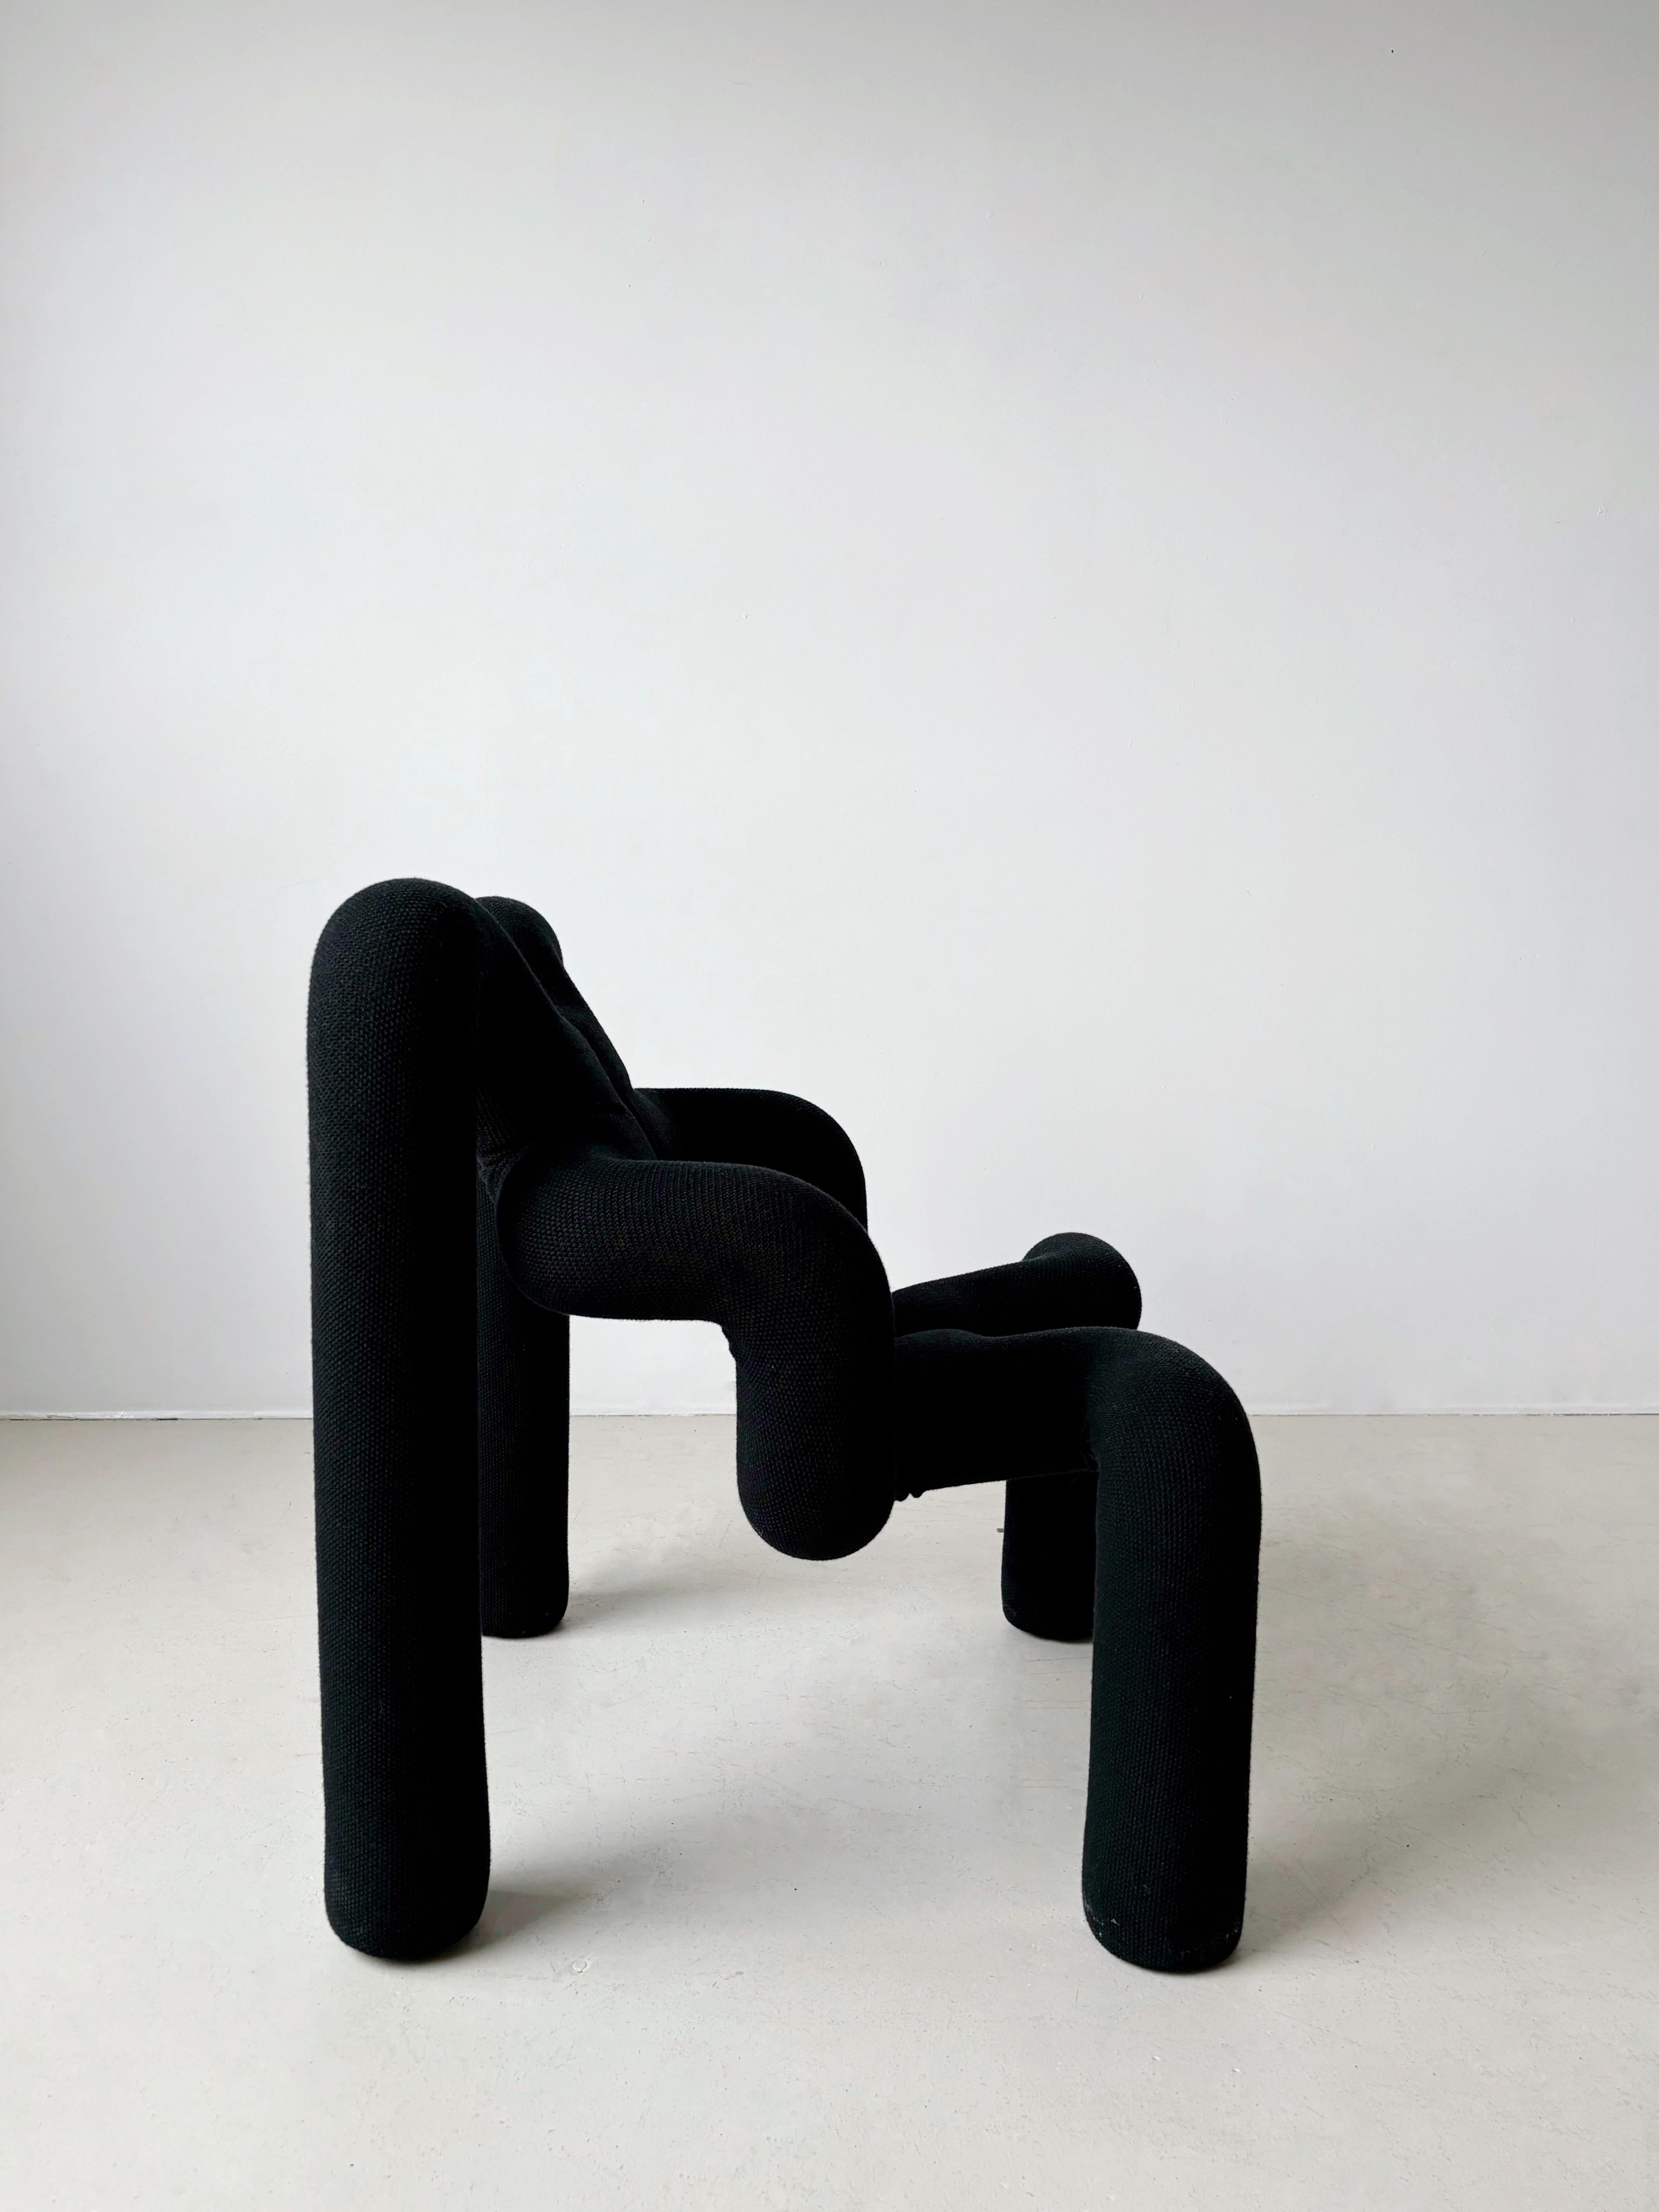 Ekstrem chair designed by Terje Ekstrøm, Norway, 1984 

Designed 1984 and produced by Varier, 2022.

Black woolen knit fabric over foam and steel frame. This is the official production of the Ekstrem Chair. 

Height 31”, width 28.25”, depth 27.5”,